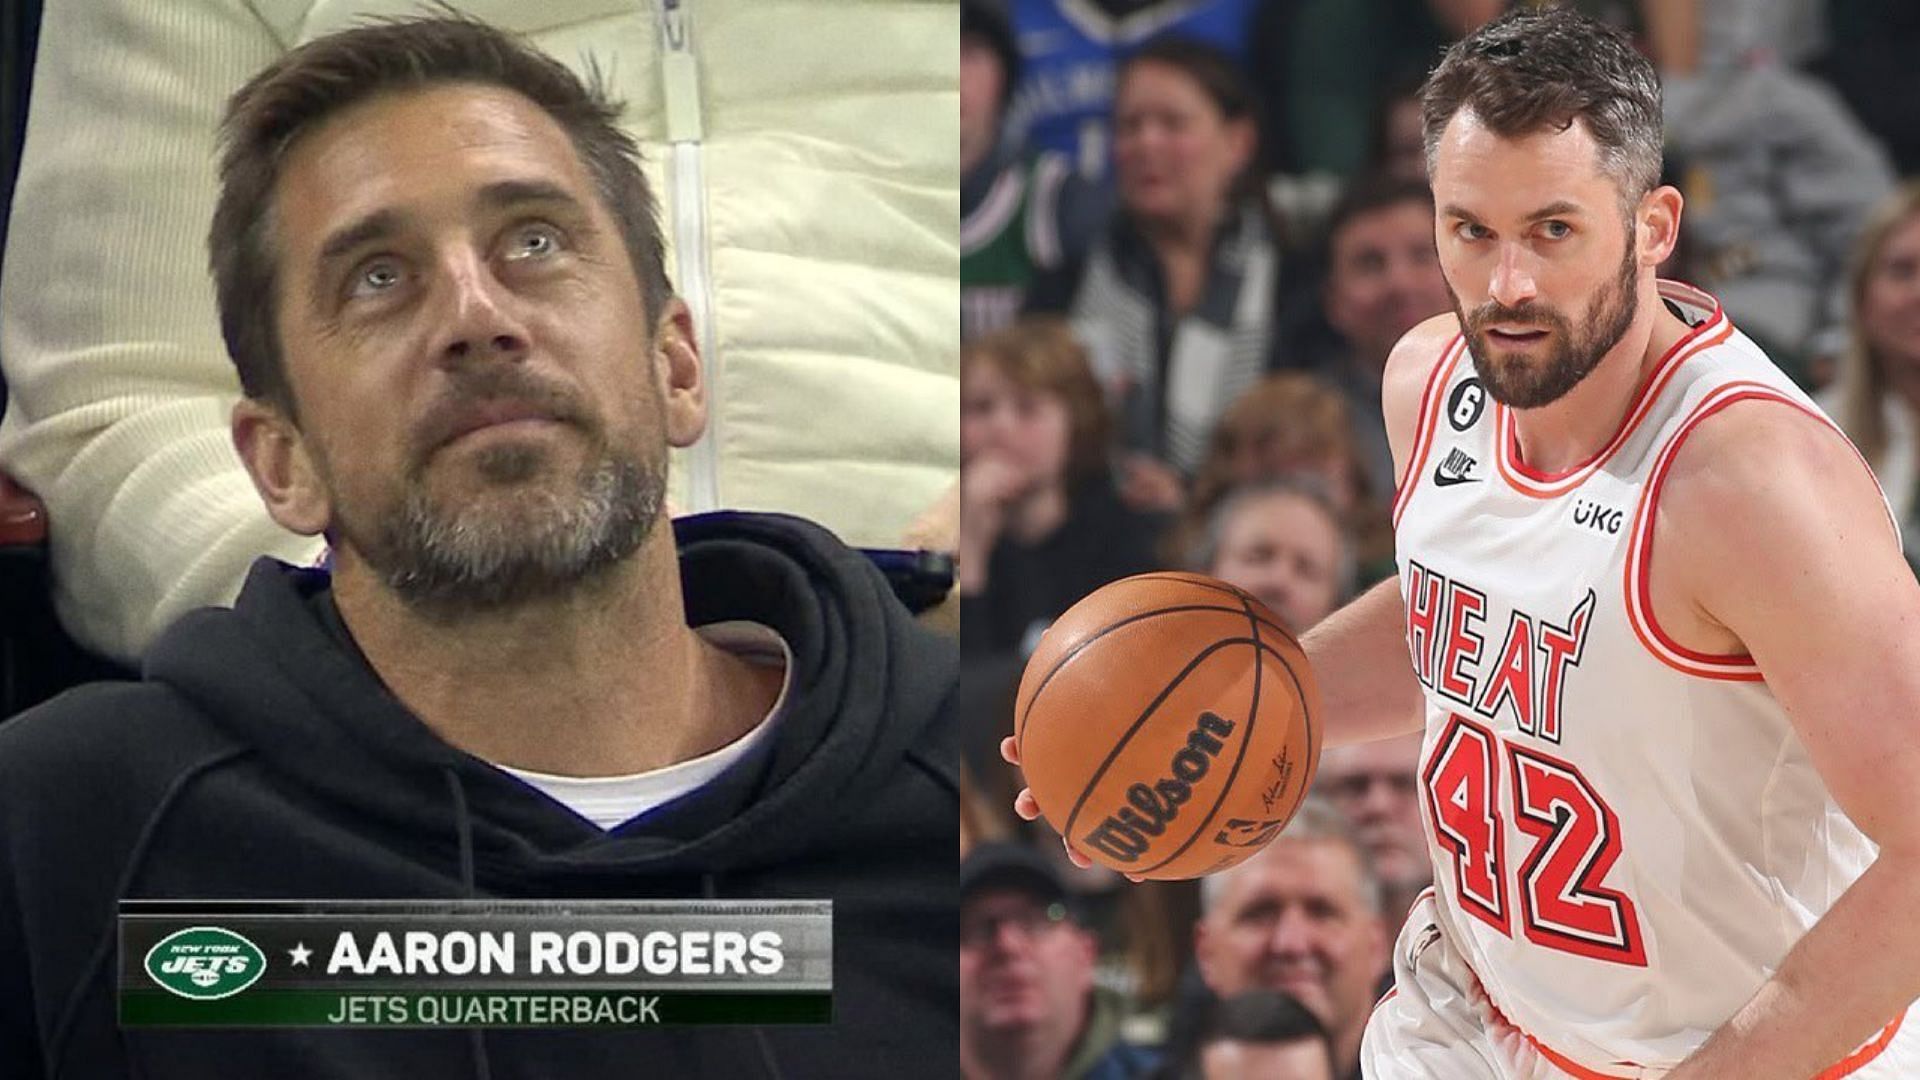 Kevin Love (r) had some words for Jets QB Aaron Rodgers (l) after the Heat defeated the Knicks